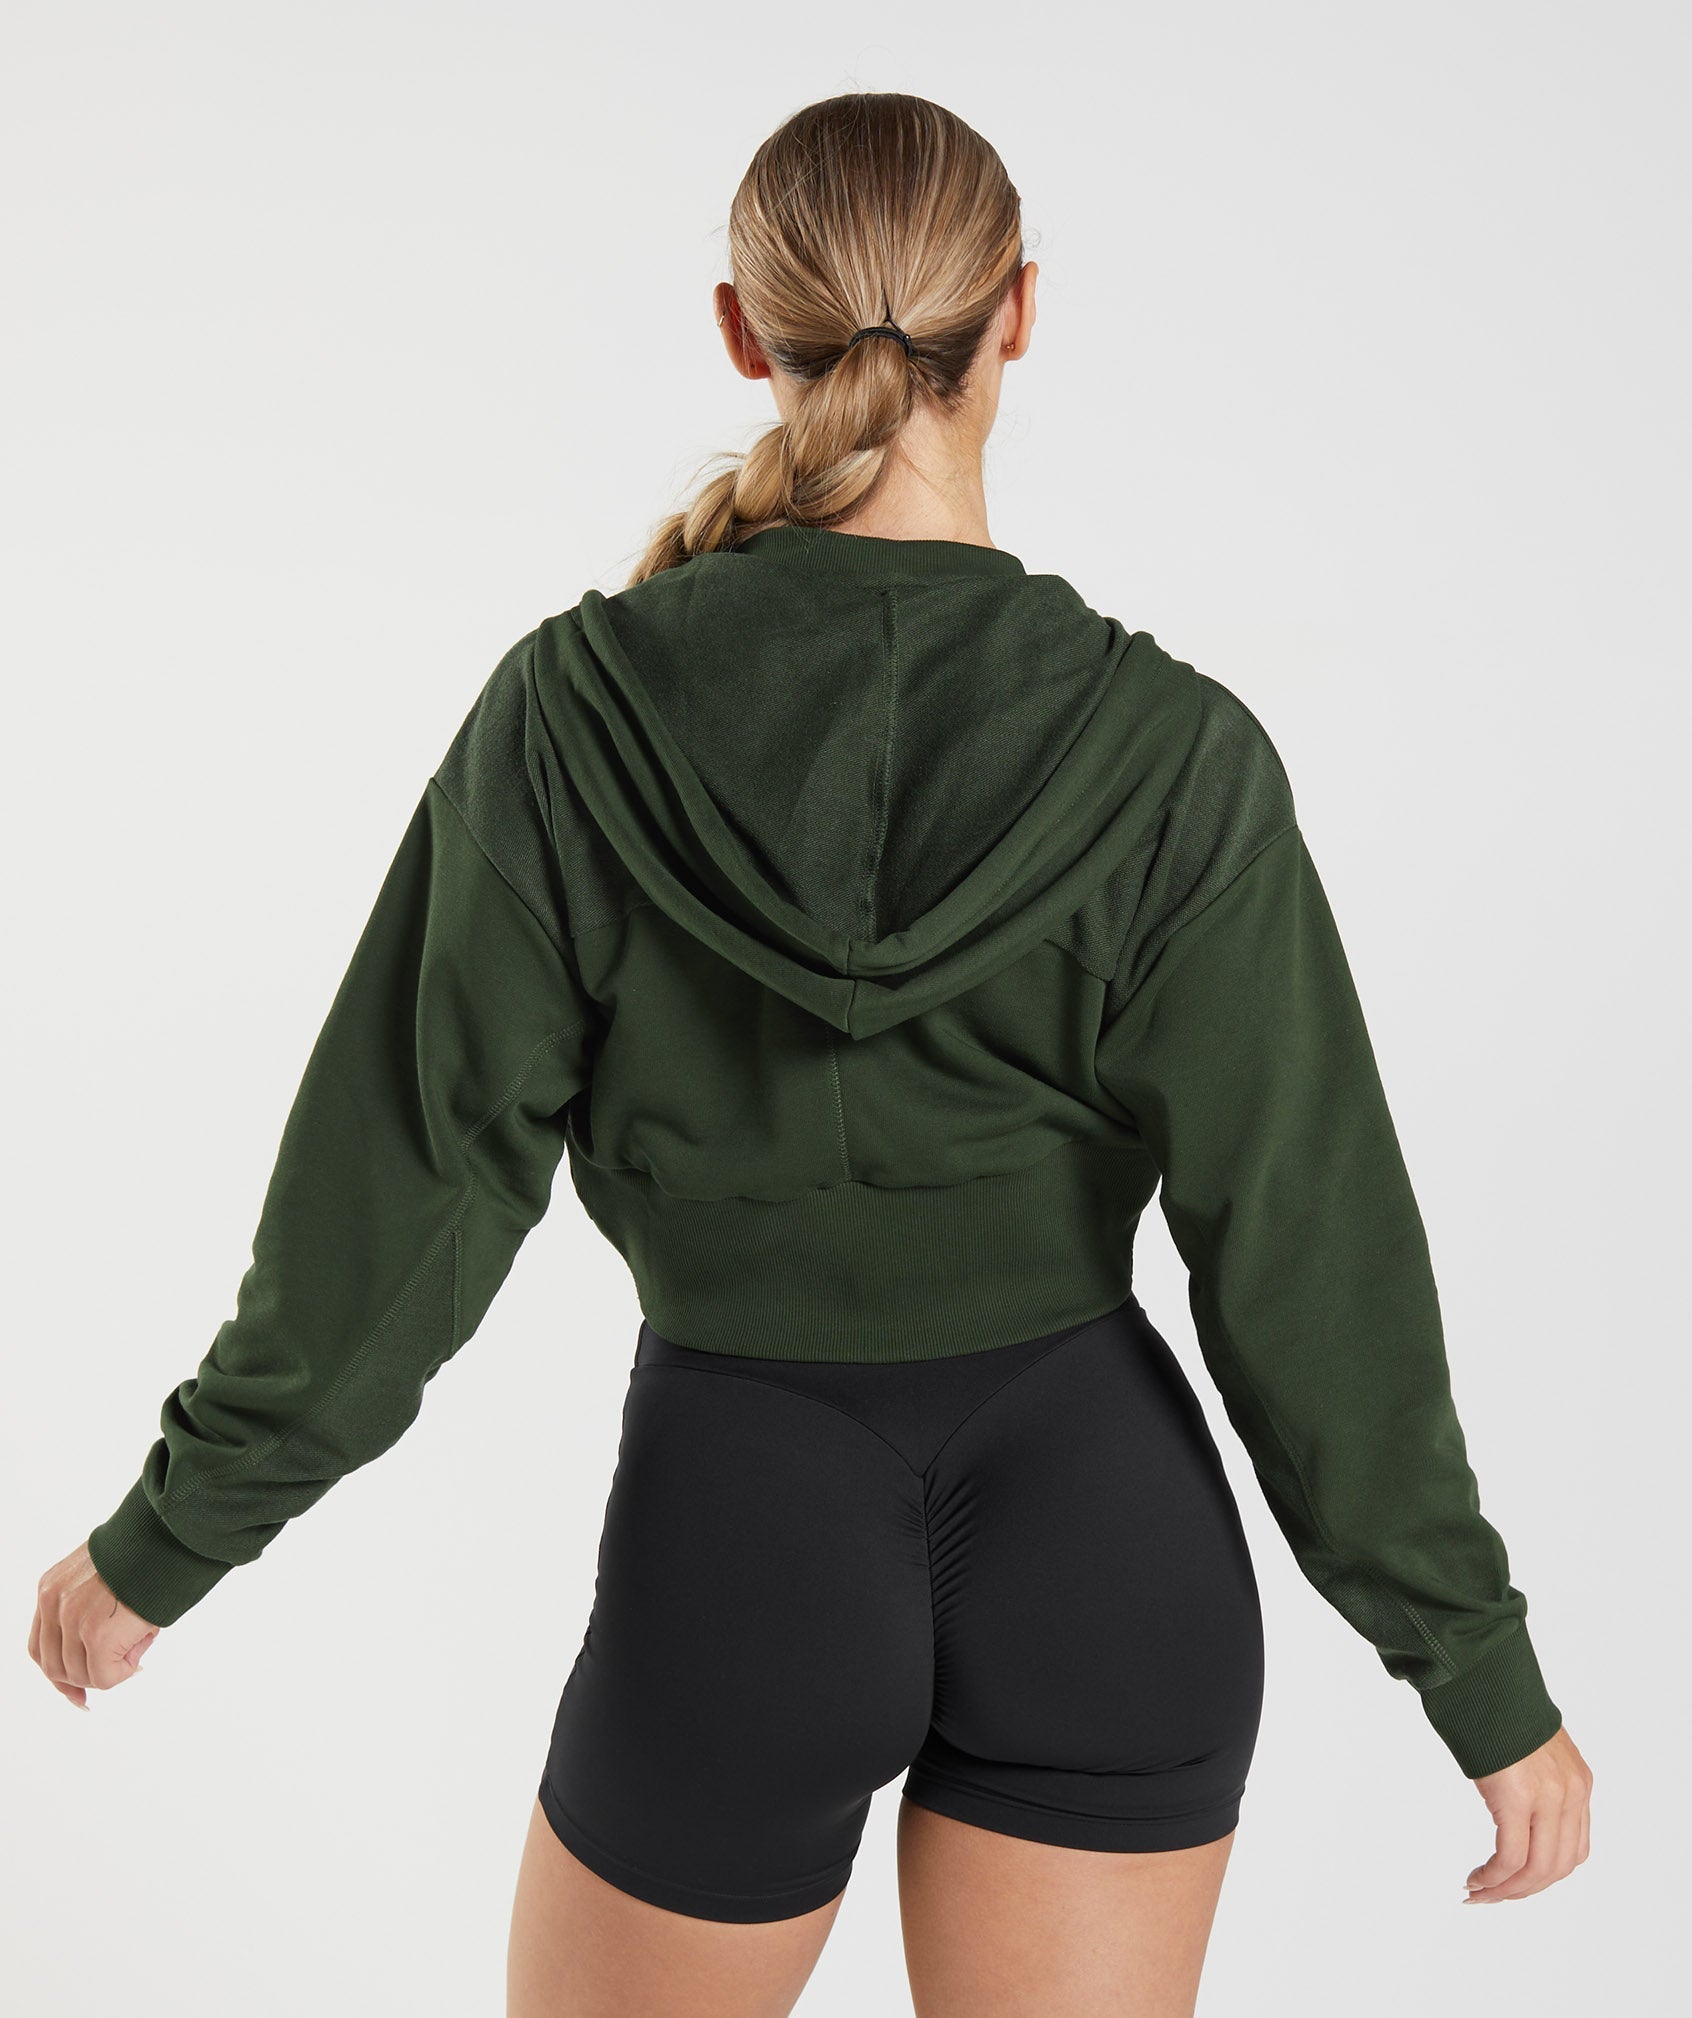 GS Power Cropped Zip Hoodie in Moss Olive - view 2